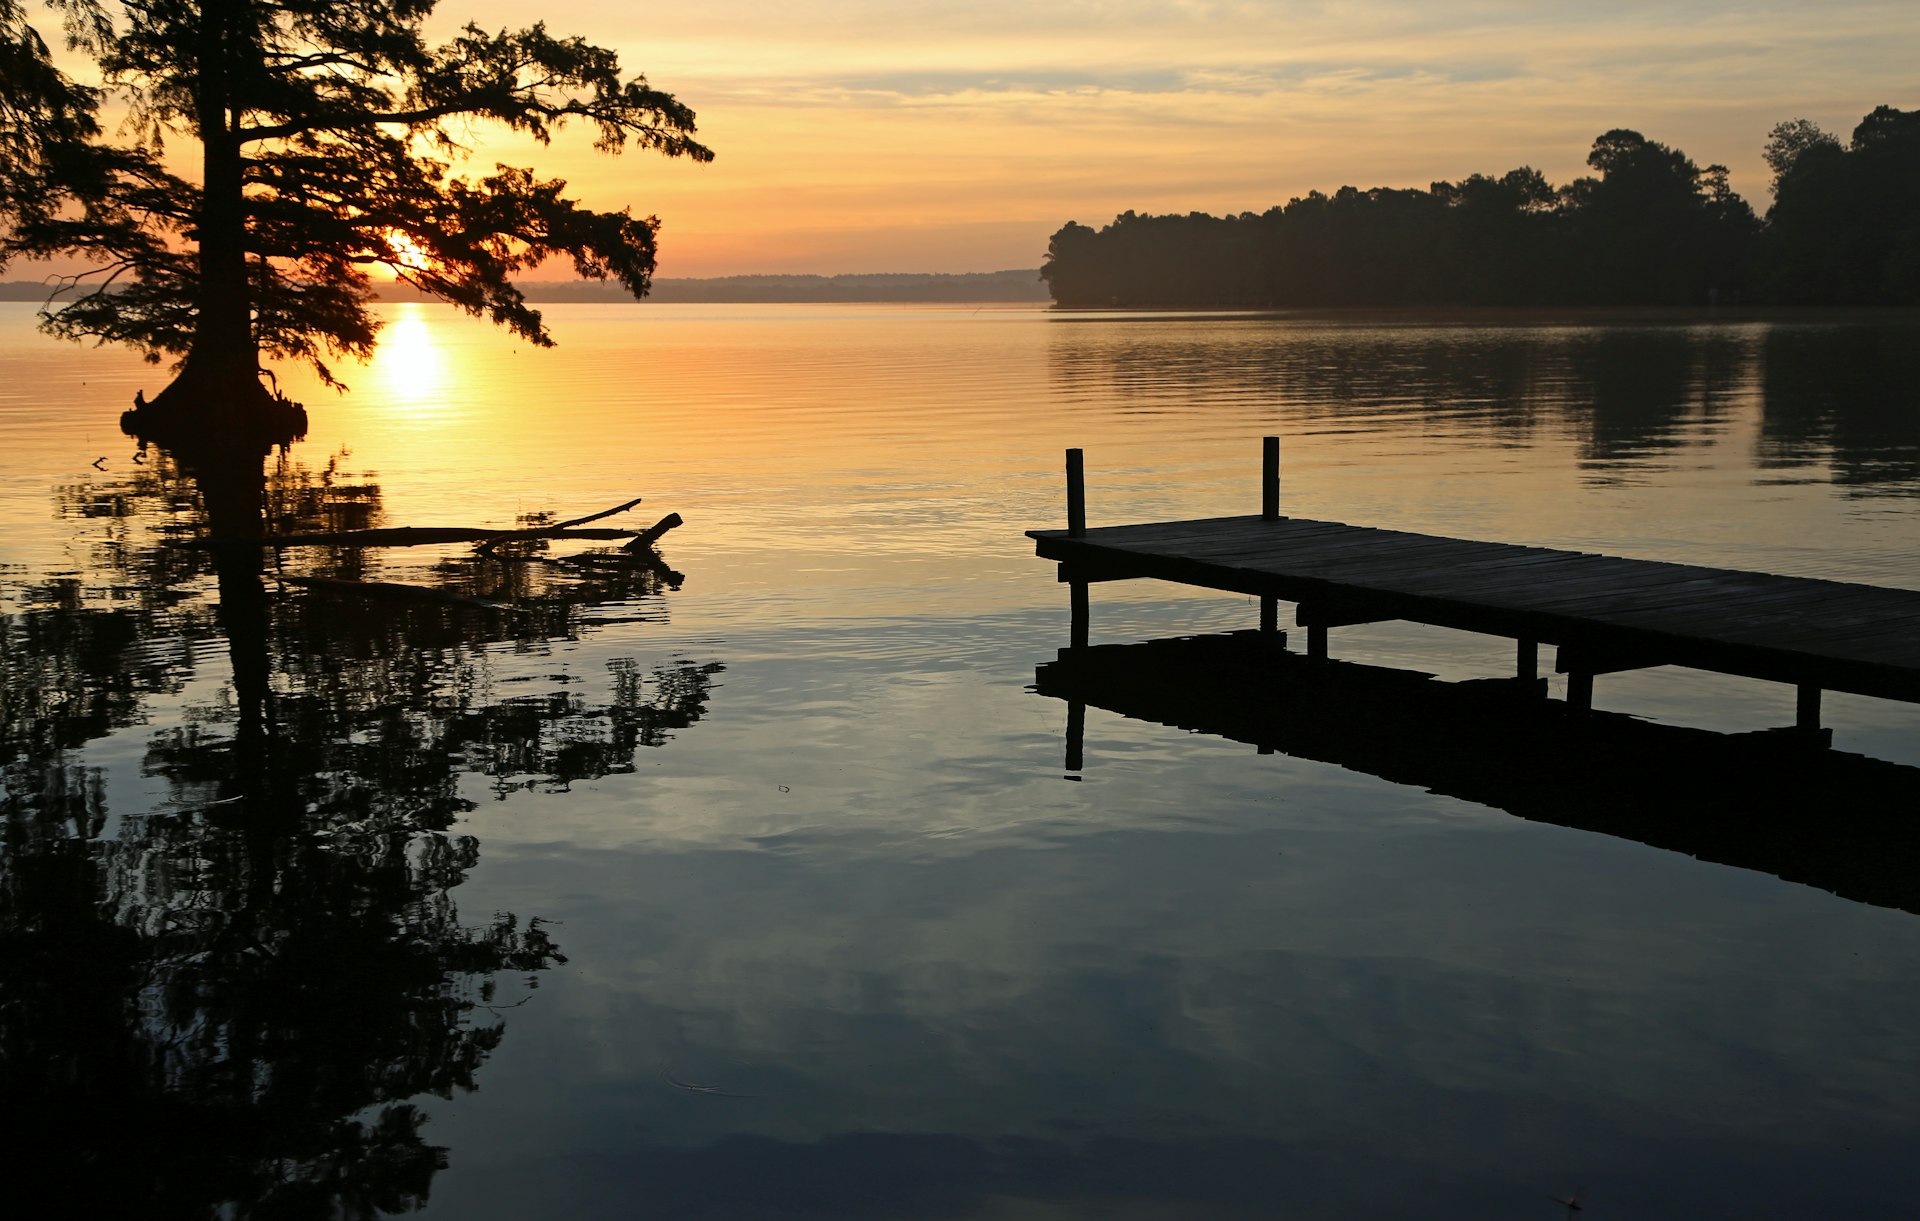 The sun rises over Reelfoot Lake in Tennessee. There is a wooden pier jutting into the lake and trees dotting the shores. 